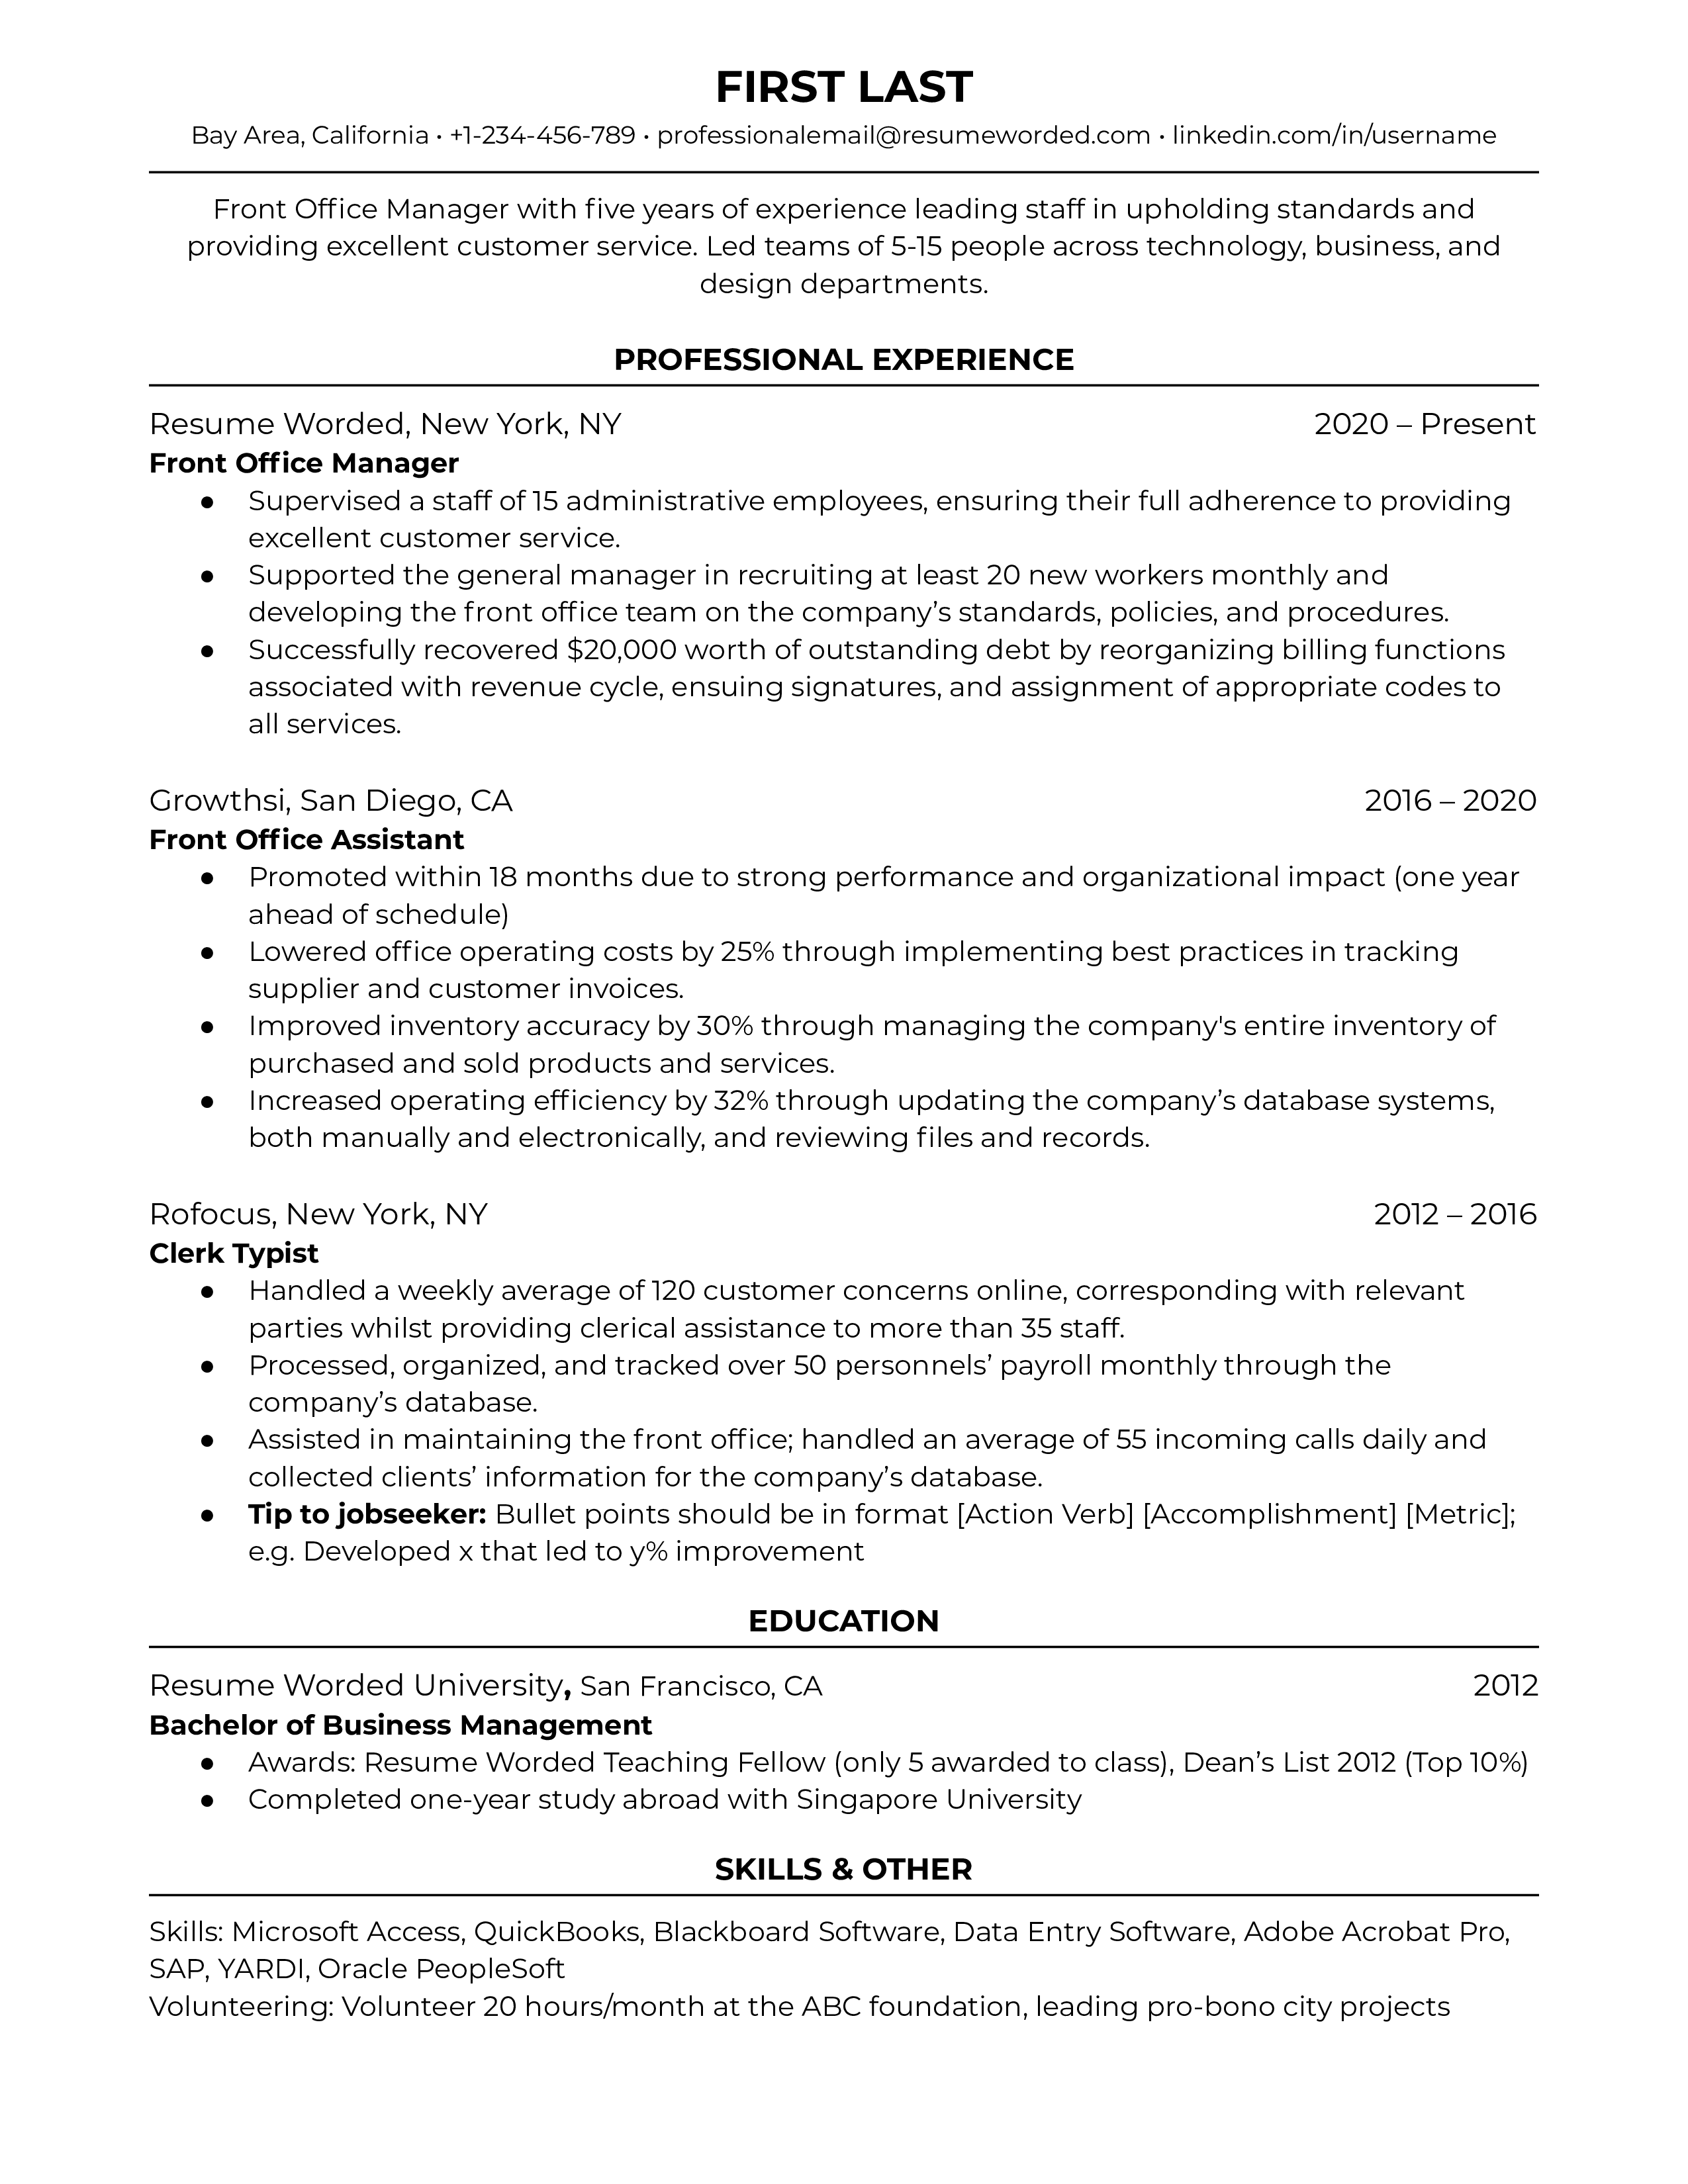 A well-structured CV for a Front Office Manager role.